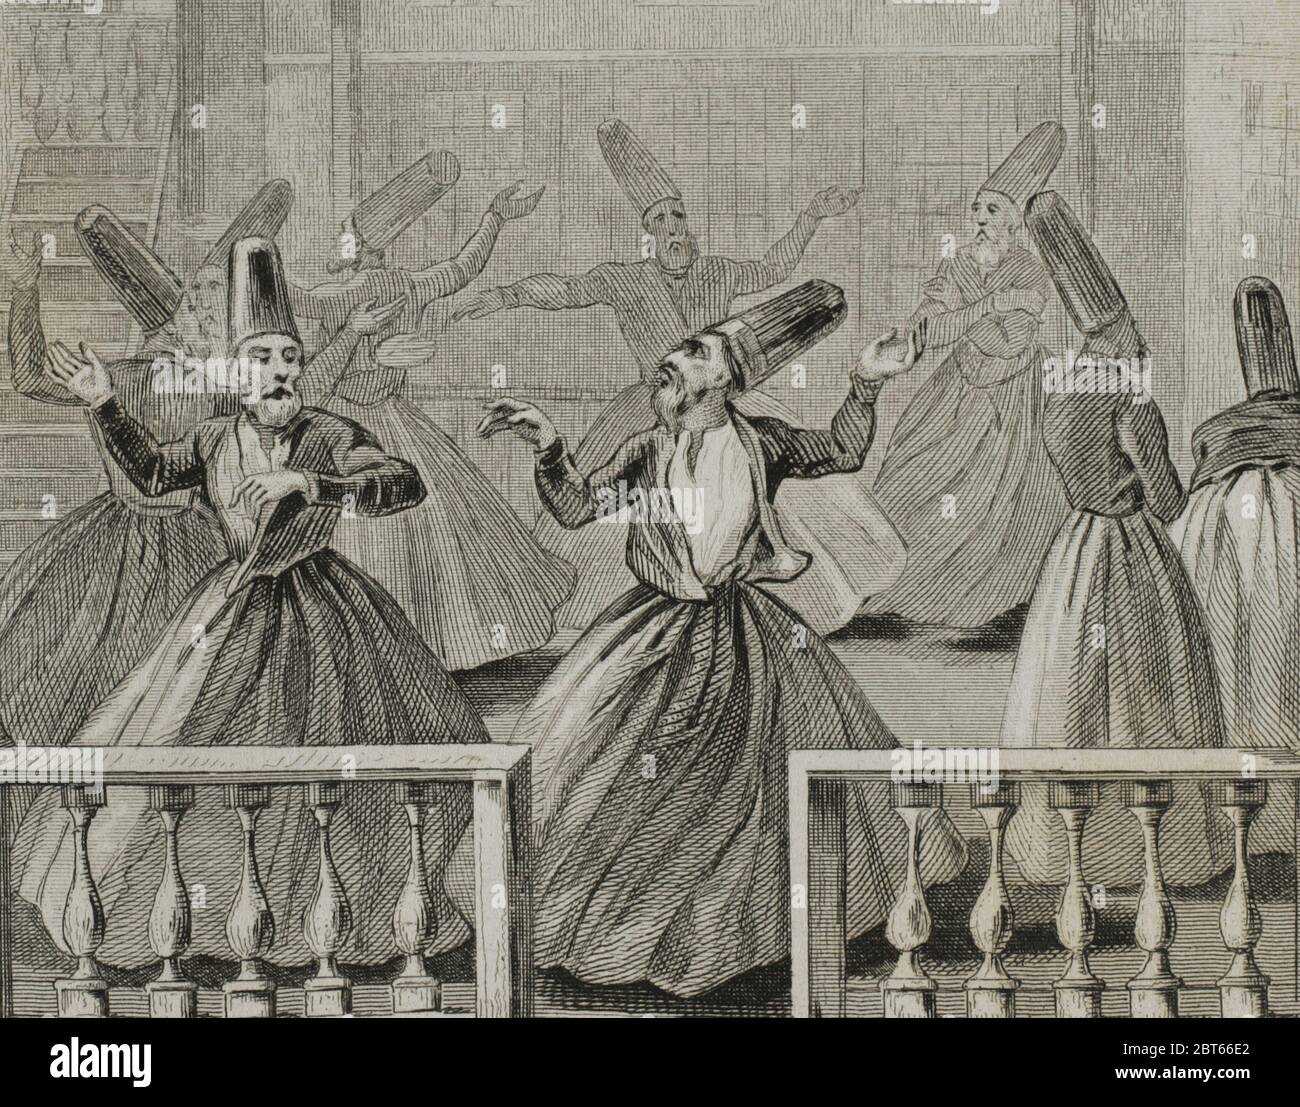 Ottoman Empire. Turkey. Whirling Derviches. Mevlevi Order. The whirling dervishes were founded by Jelaluddin Rumi (1207-1273). Engraving by Lemaitre, Vernier and Monnin. Historia de Turquia by Joseph Marie Jouannin (1783-1844) and Jules Van Gaver, 1840. Stock Photo